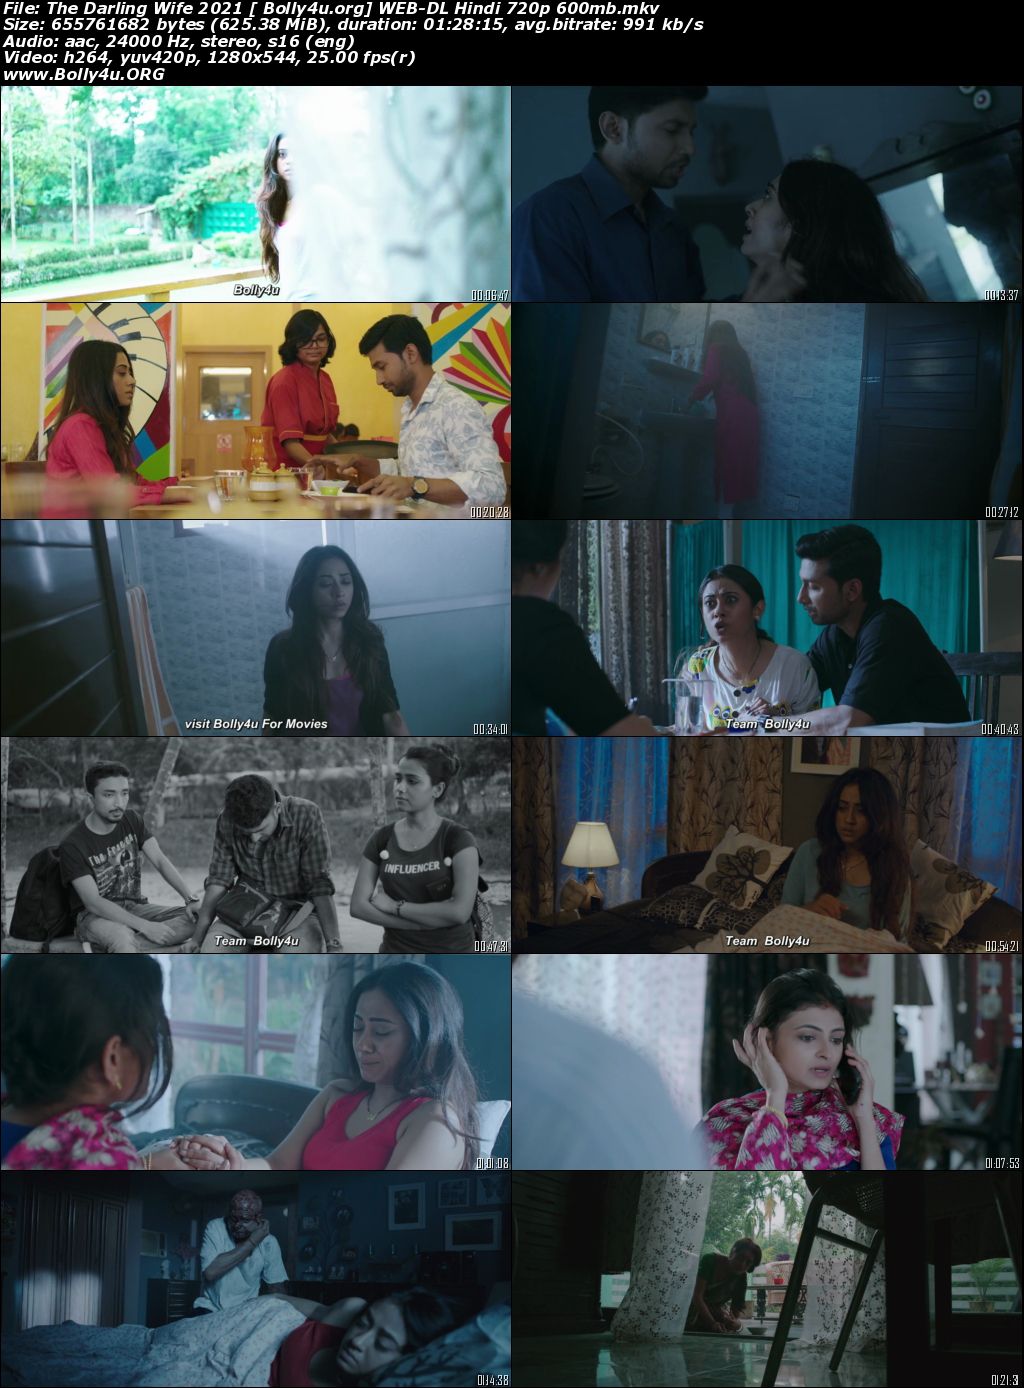 The Darling Wife 2021 WEB-DL 600Mb Hindi Movie Download 720p